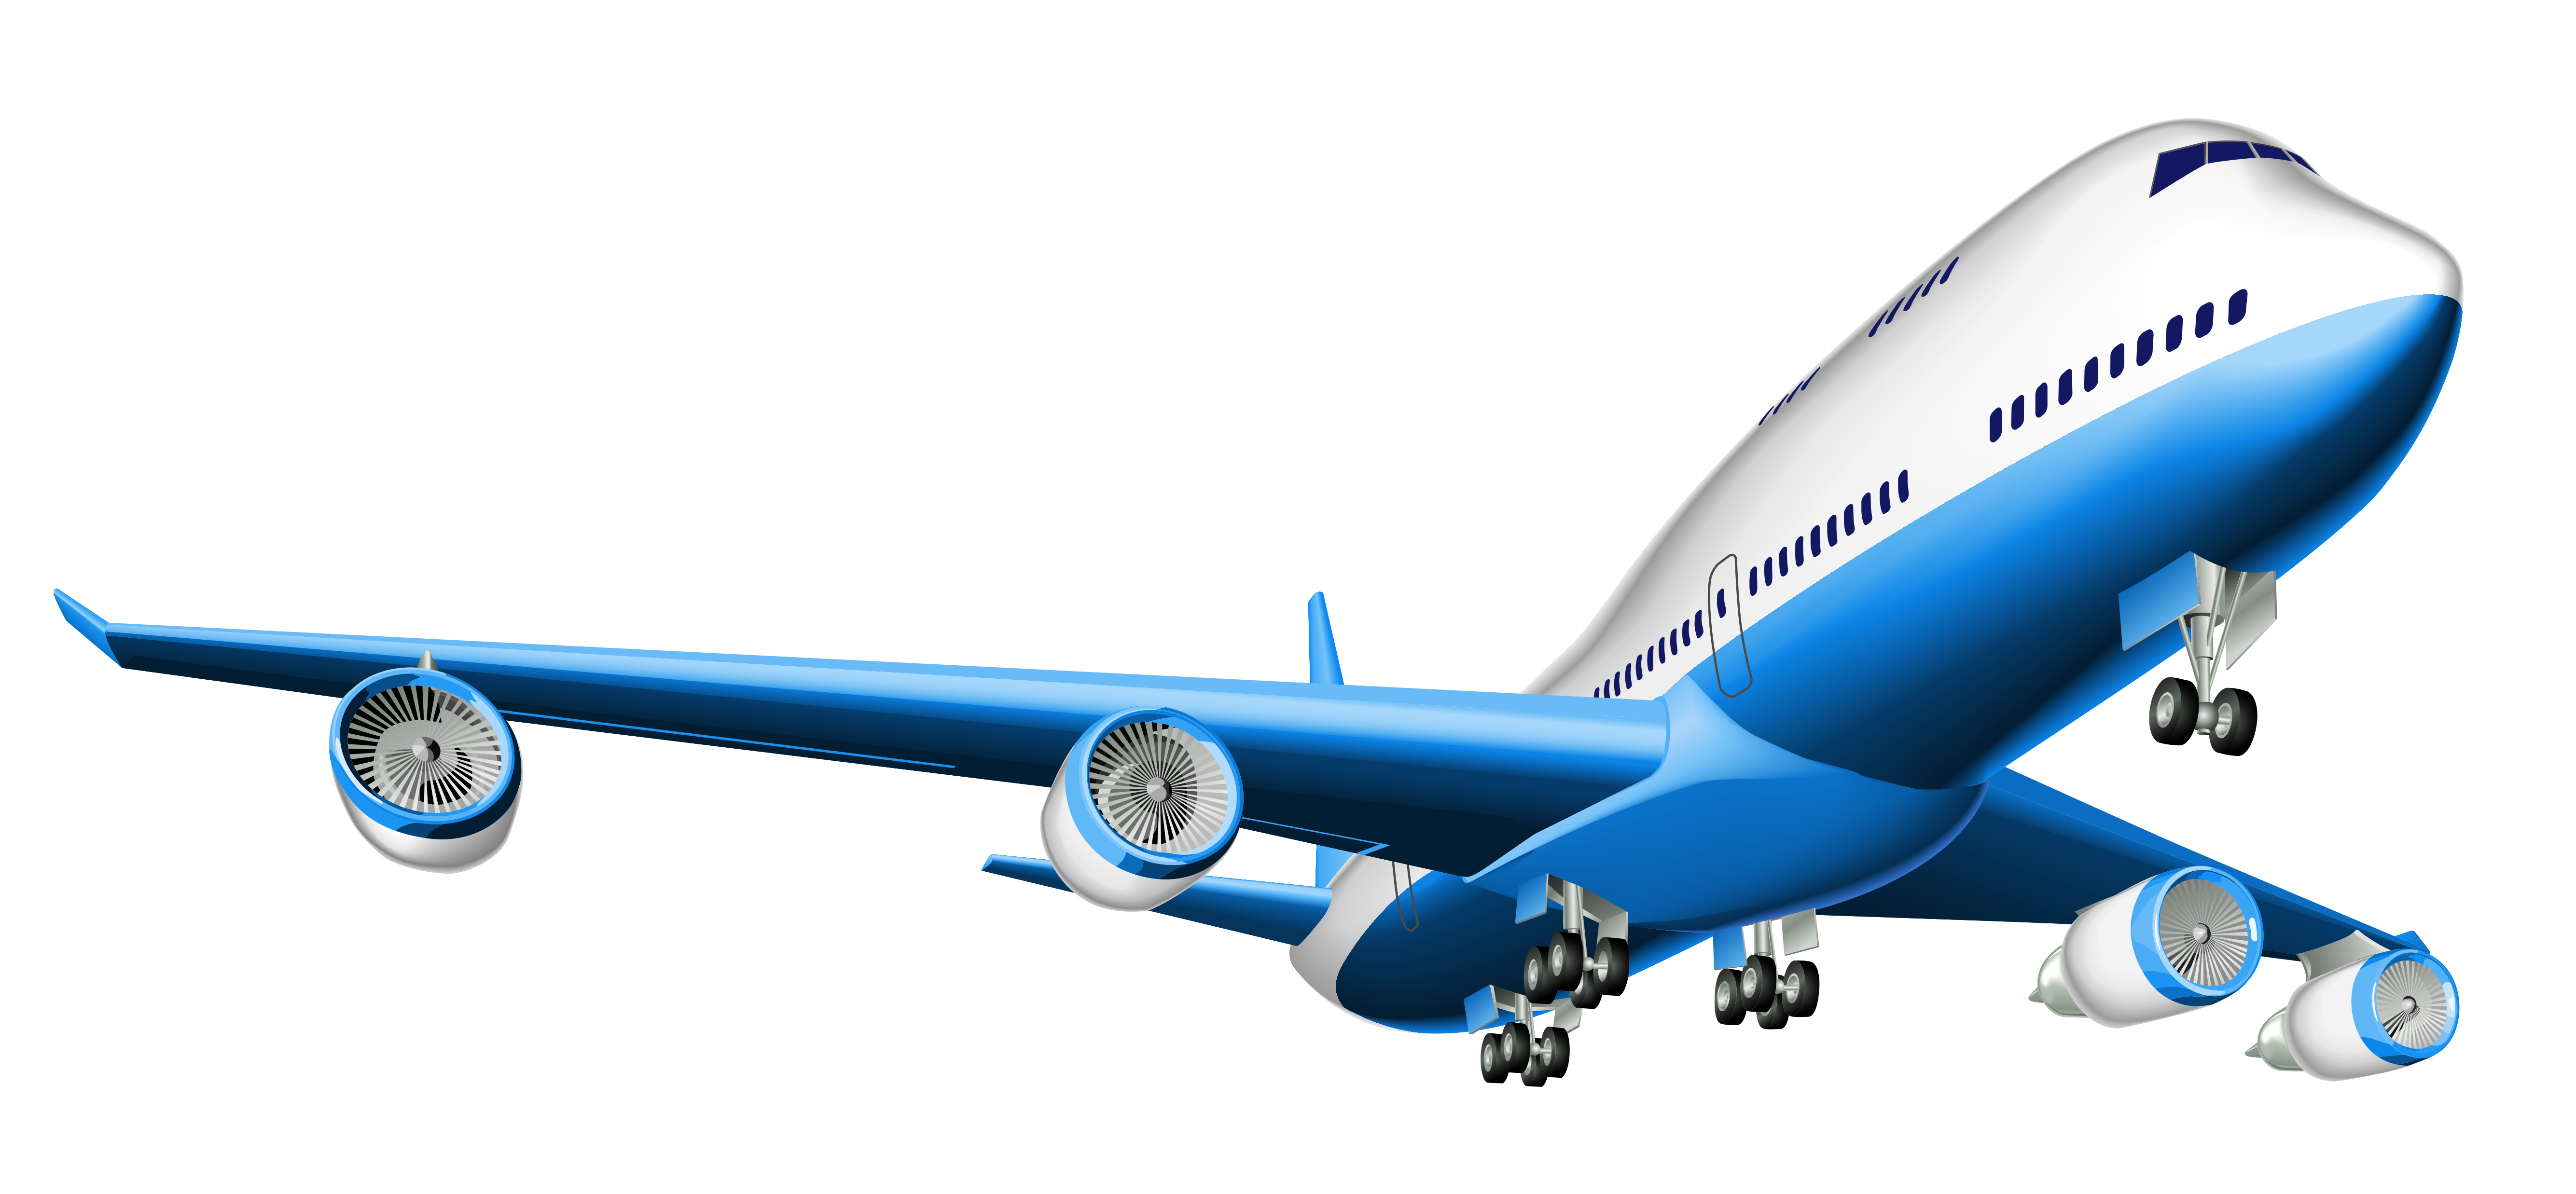 Business Jet Plane Png Clipart Airplane Clipart Free Transparent ...